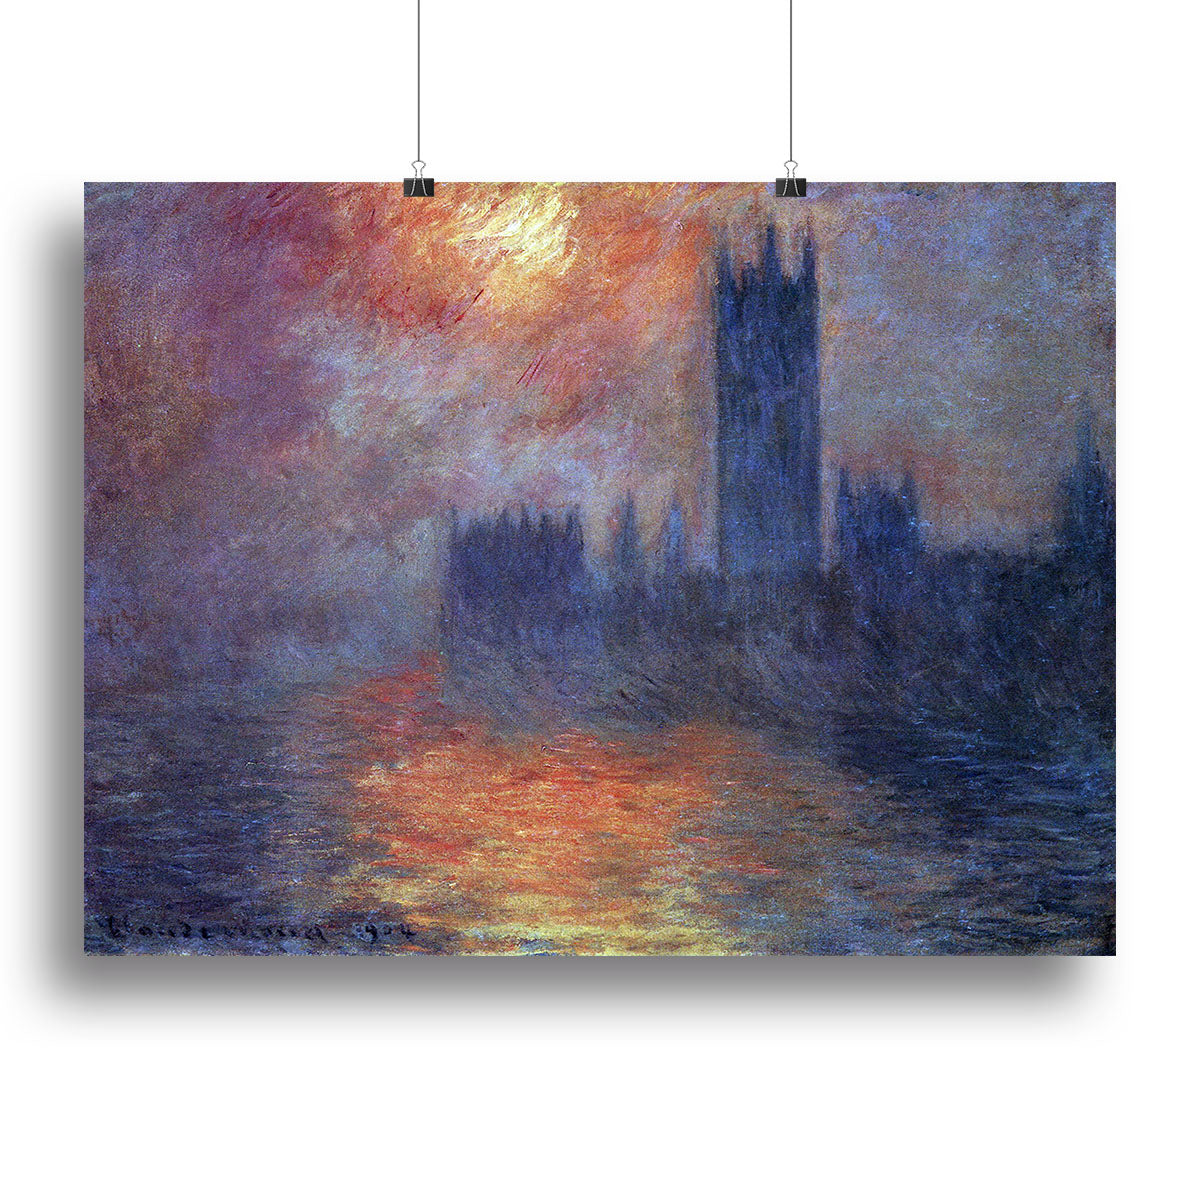 The Houses of Parliament Sunset by Monet Canvas Print or Poster - Canvas Art Rocks - 2